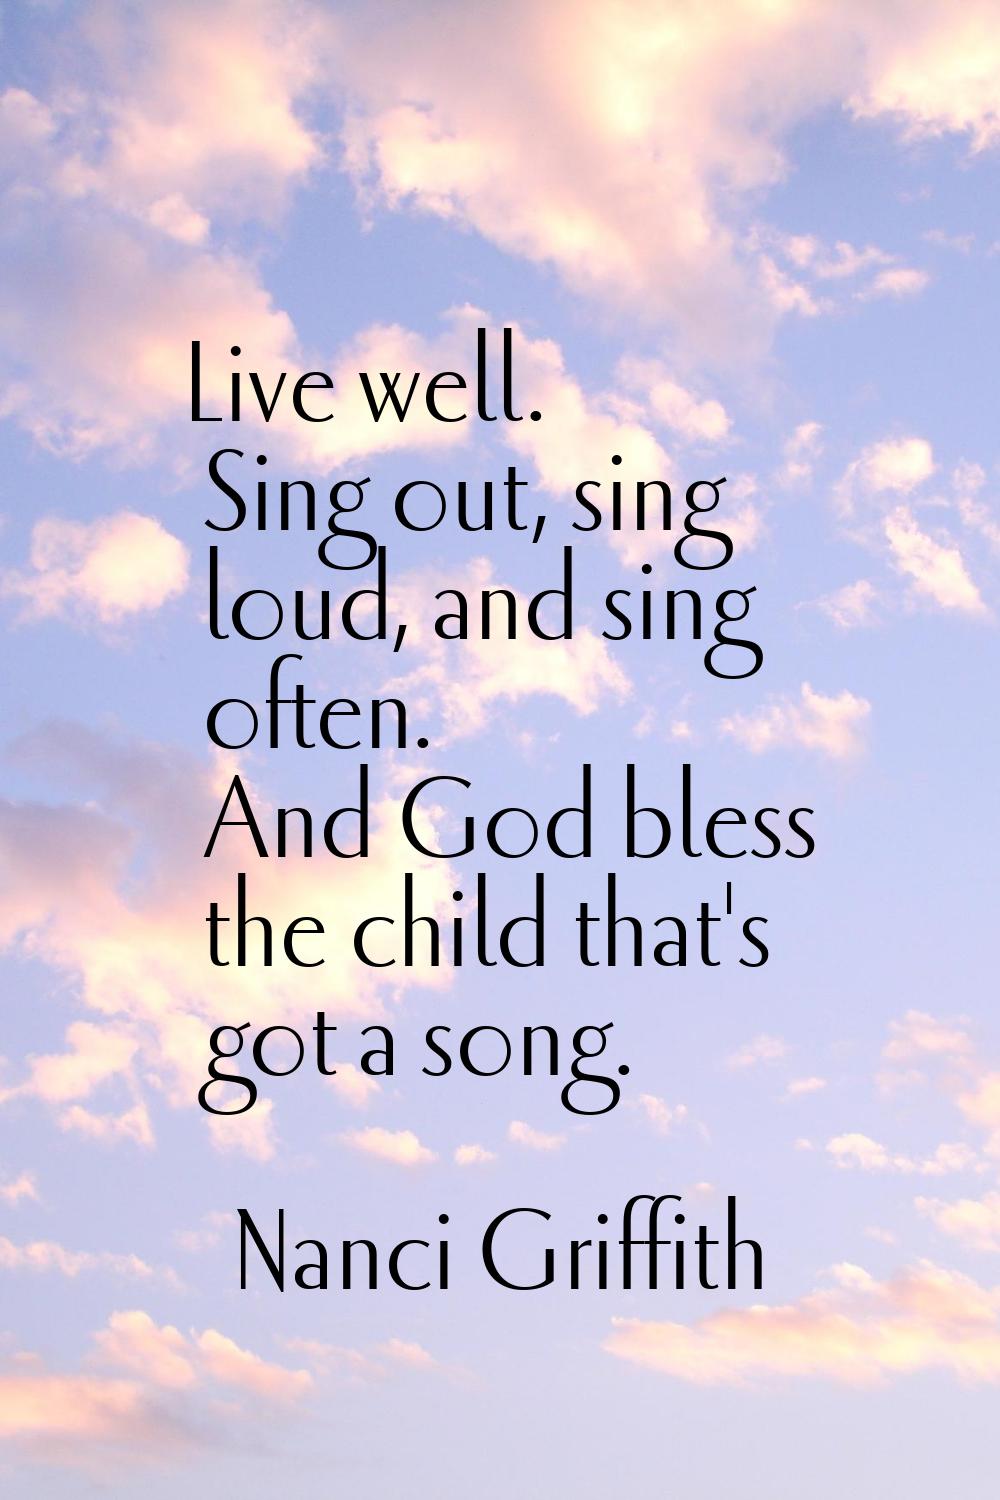 Live well. Sing out, sing loud, and sing often. And God bless the child that's got a song.